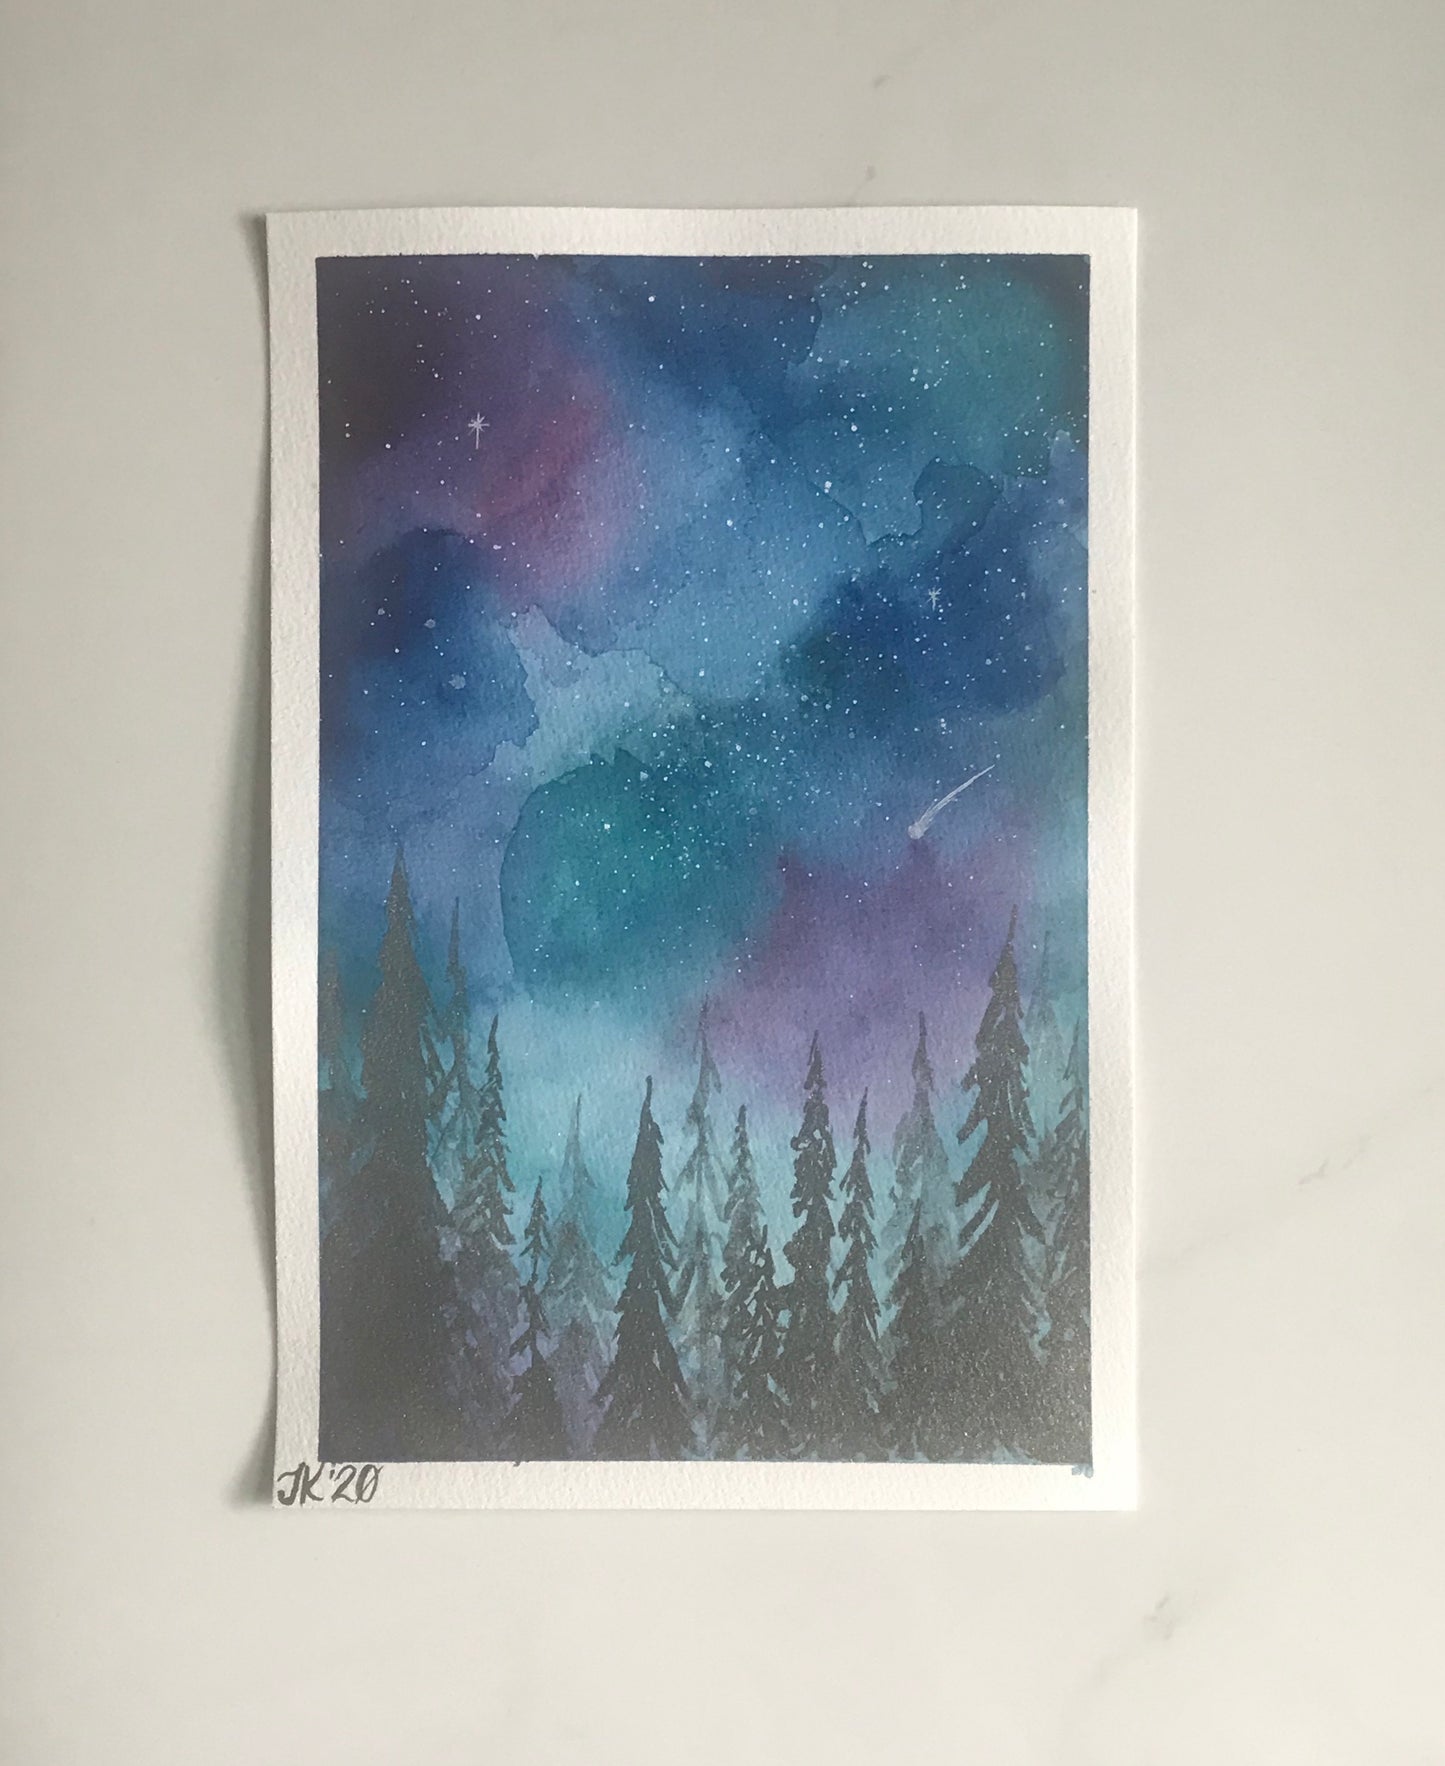 Colorful Night Sky with duochrome trees - Original Watercolor Painting